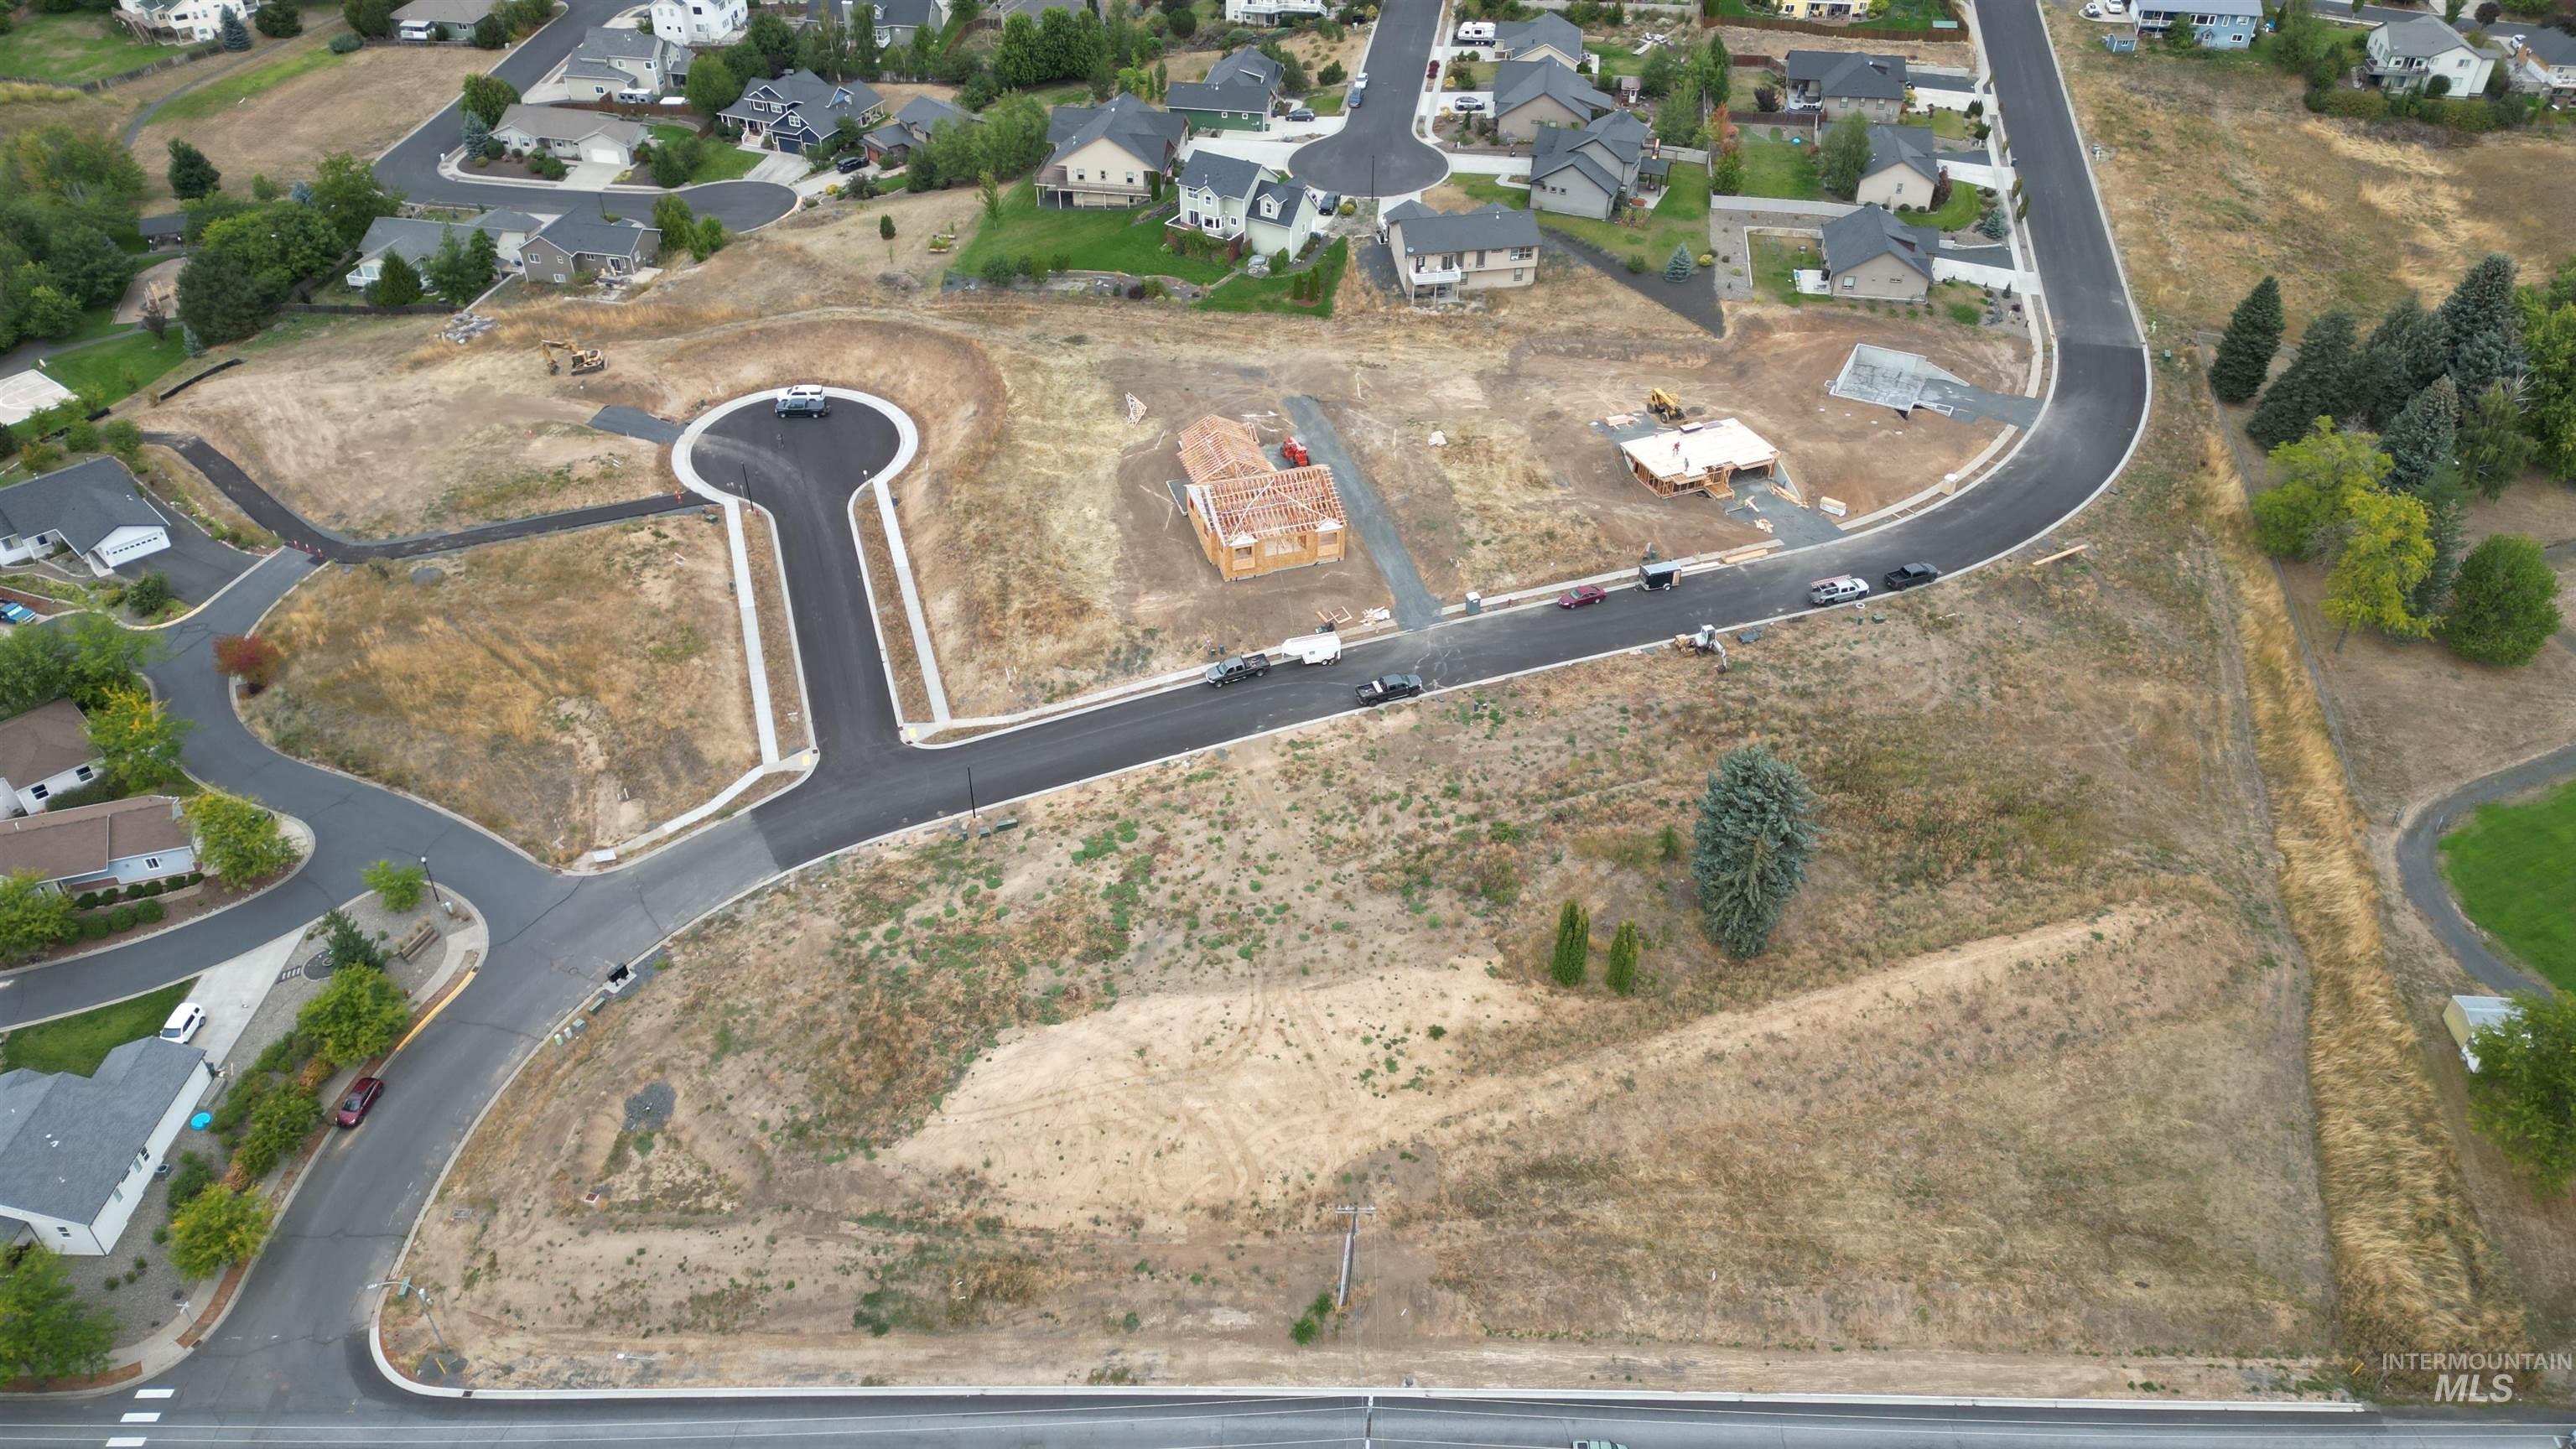 2001 Sunnyside Ave., Moscow, Idaho 83843, Land For Sale, Price $139,000,MLS 98888870